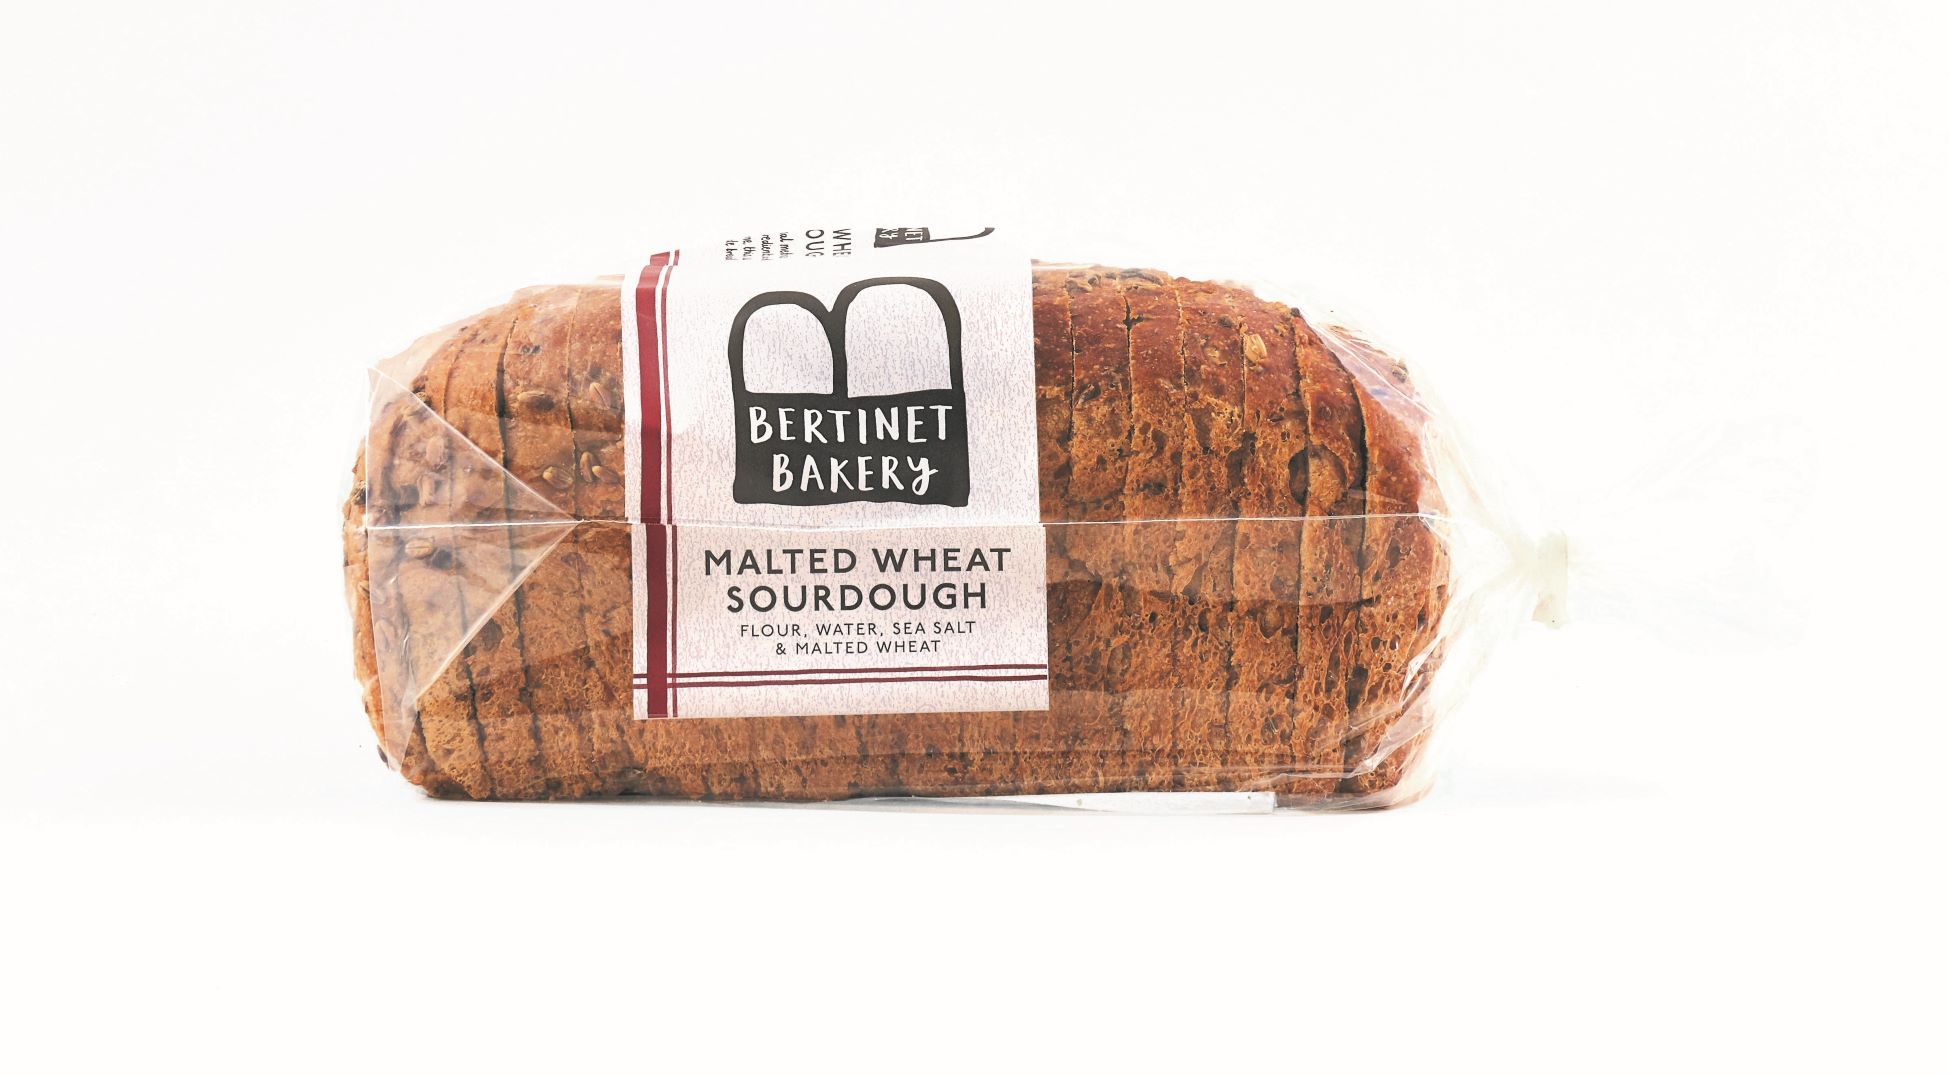 cut out image showing seeded sourdough loaf of bread from bertinet bakery on white background